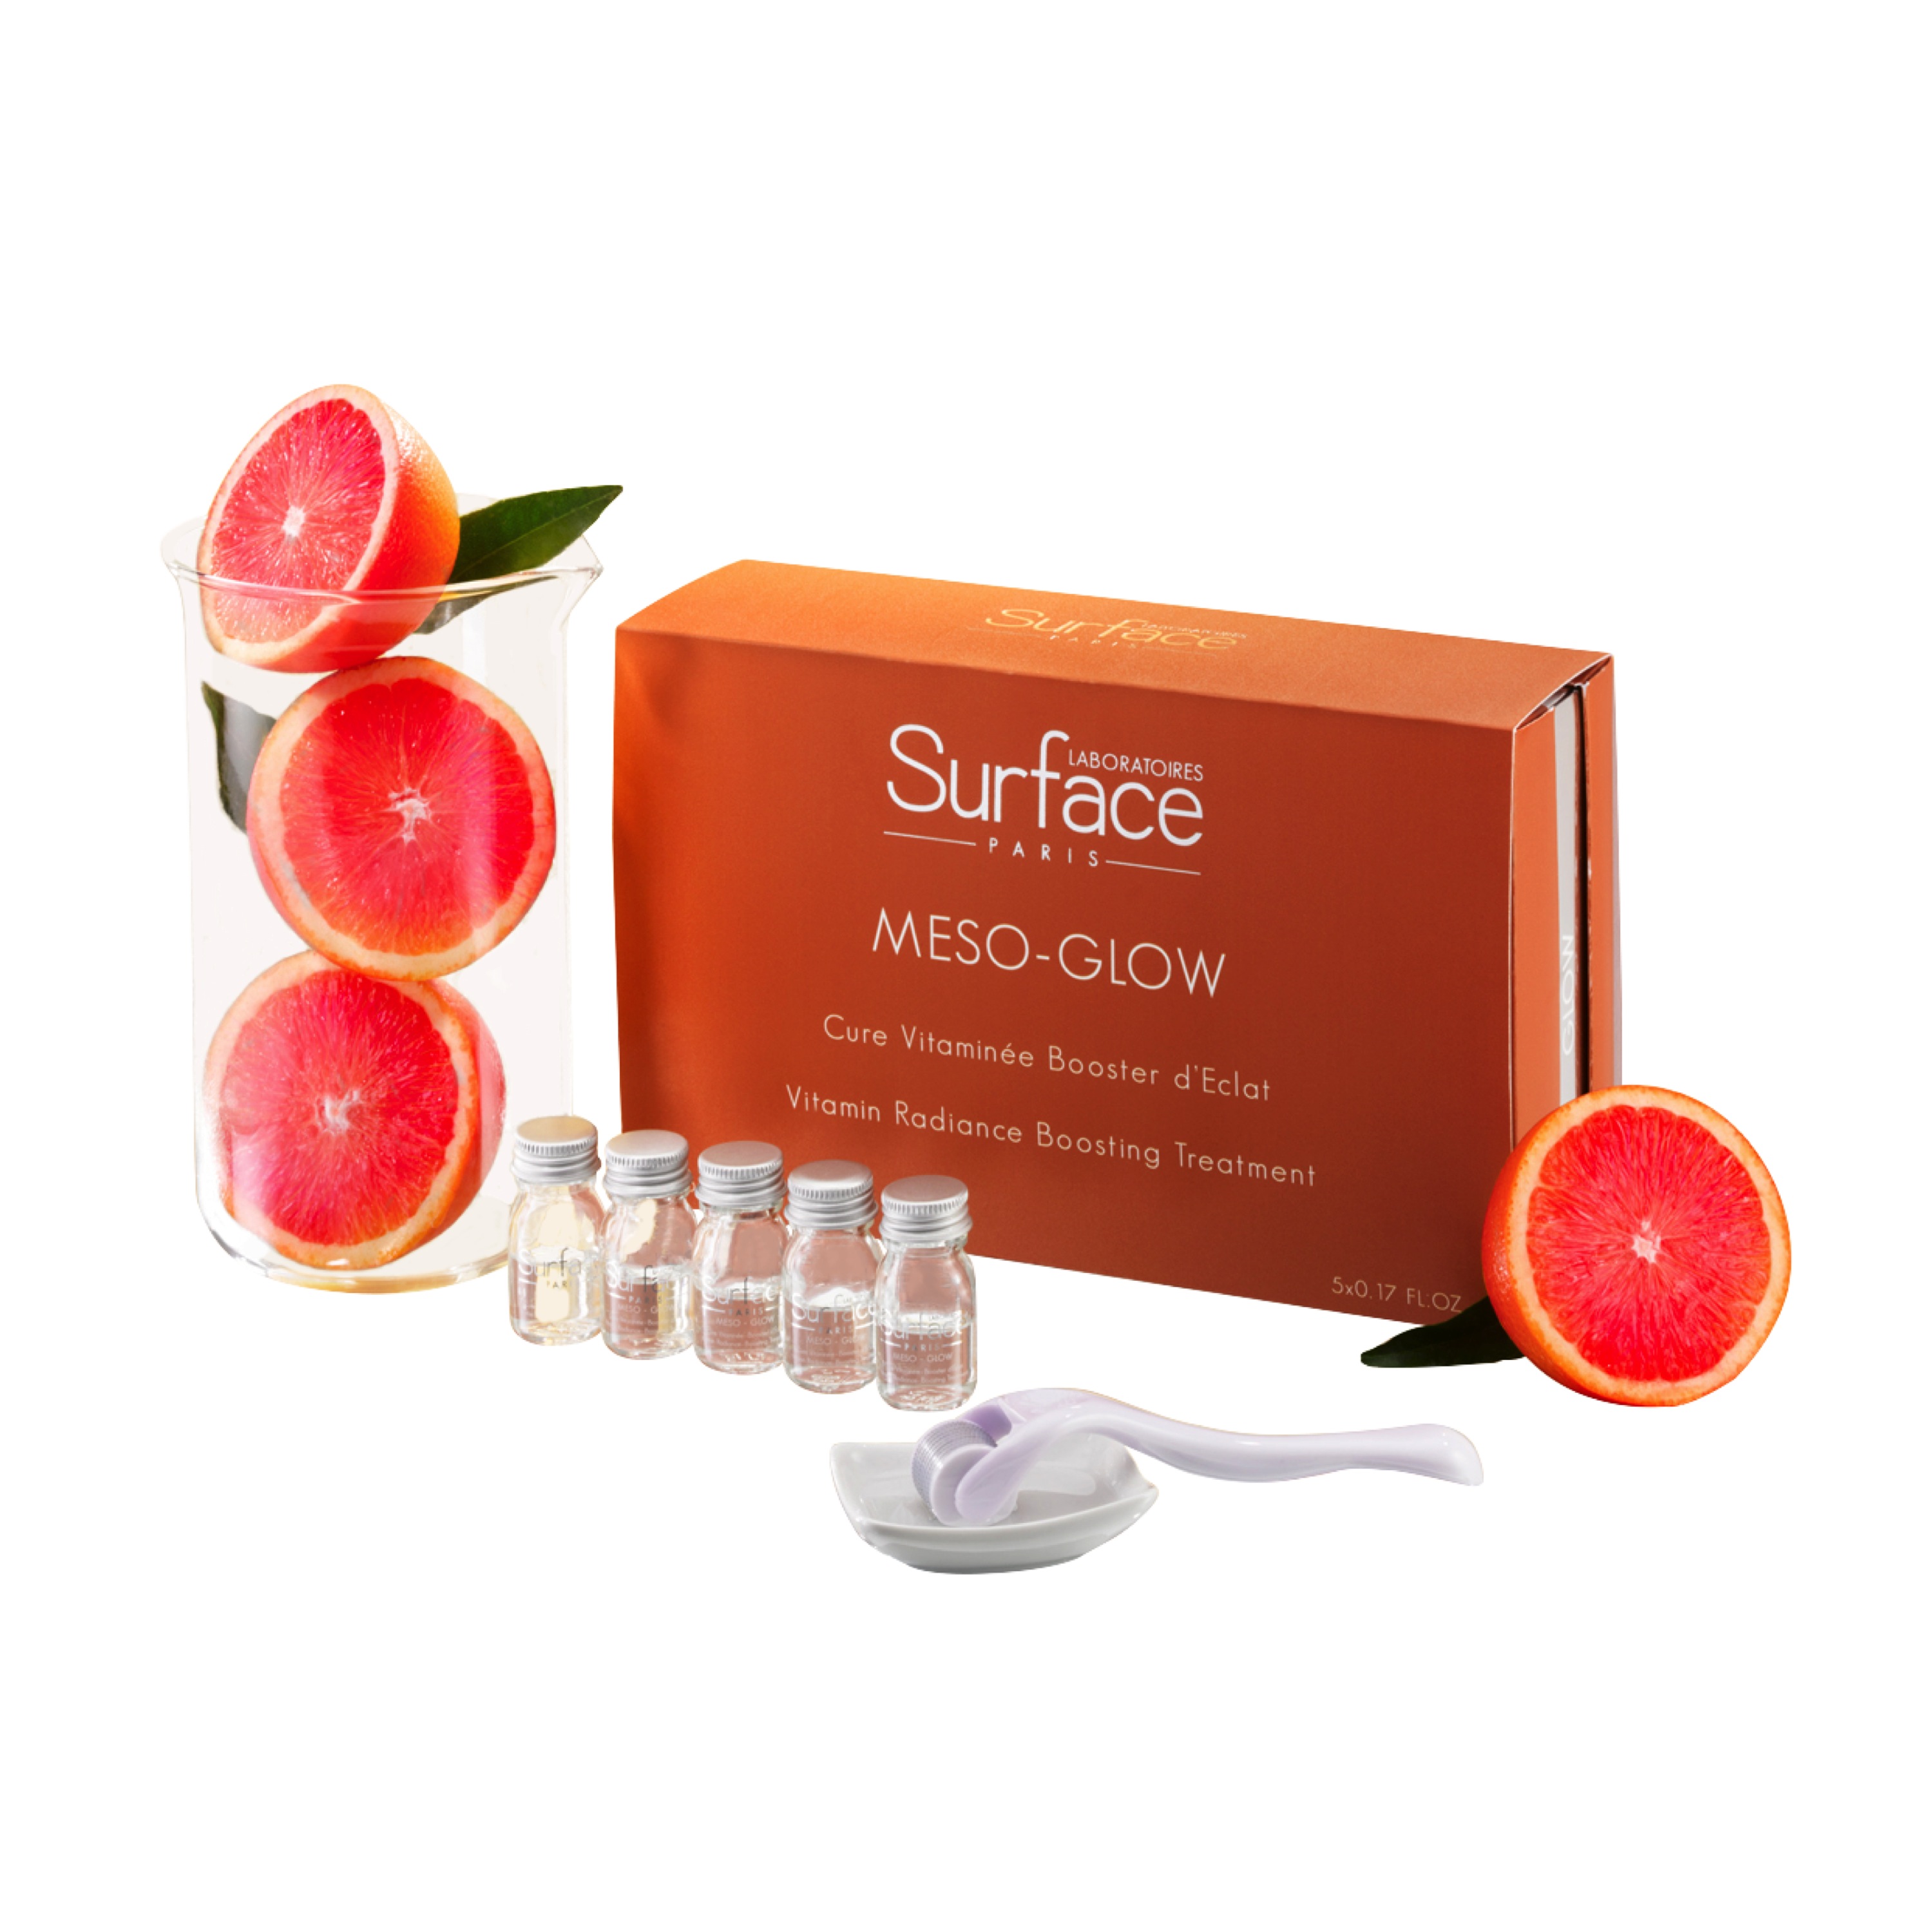 Surface Paris Meso Glow At-Home Mesotherapy Treatment